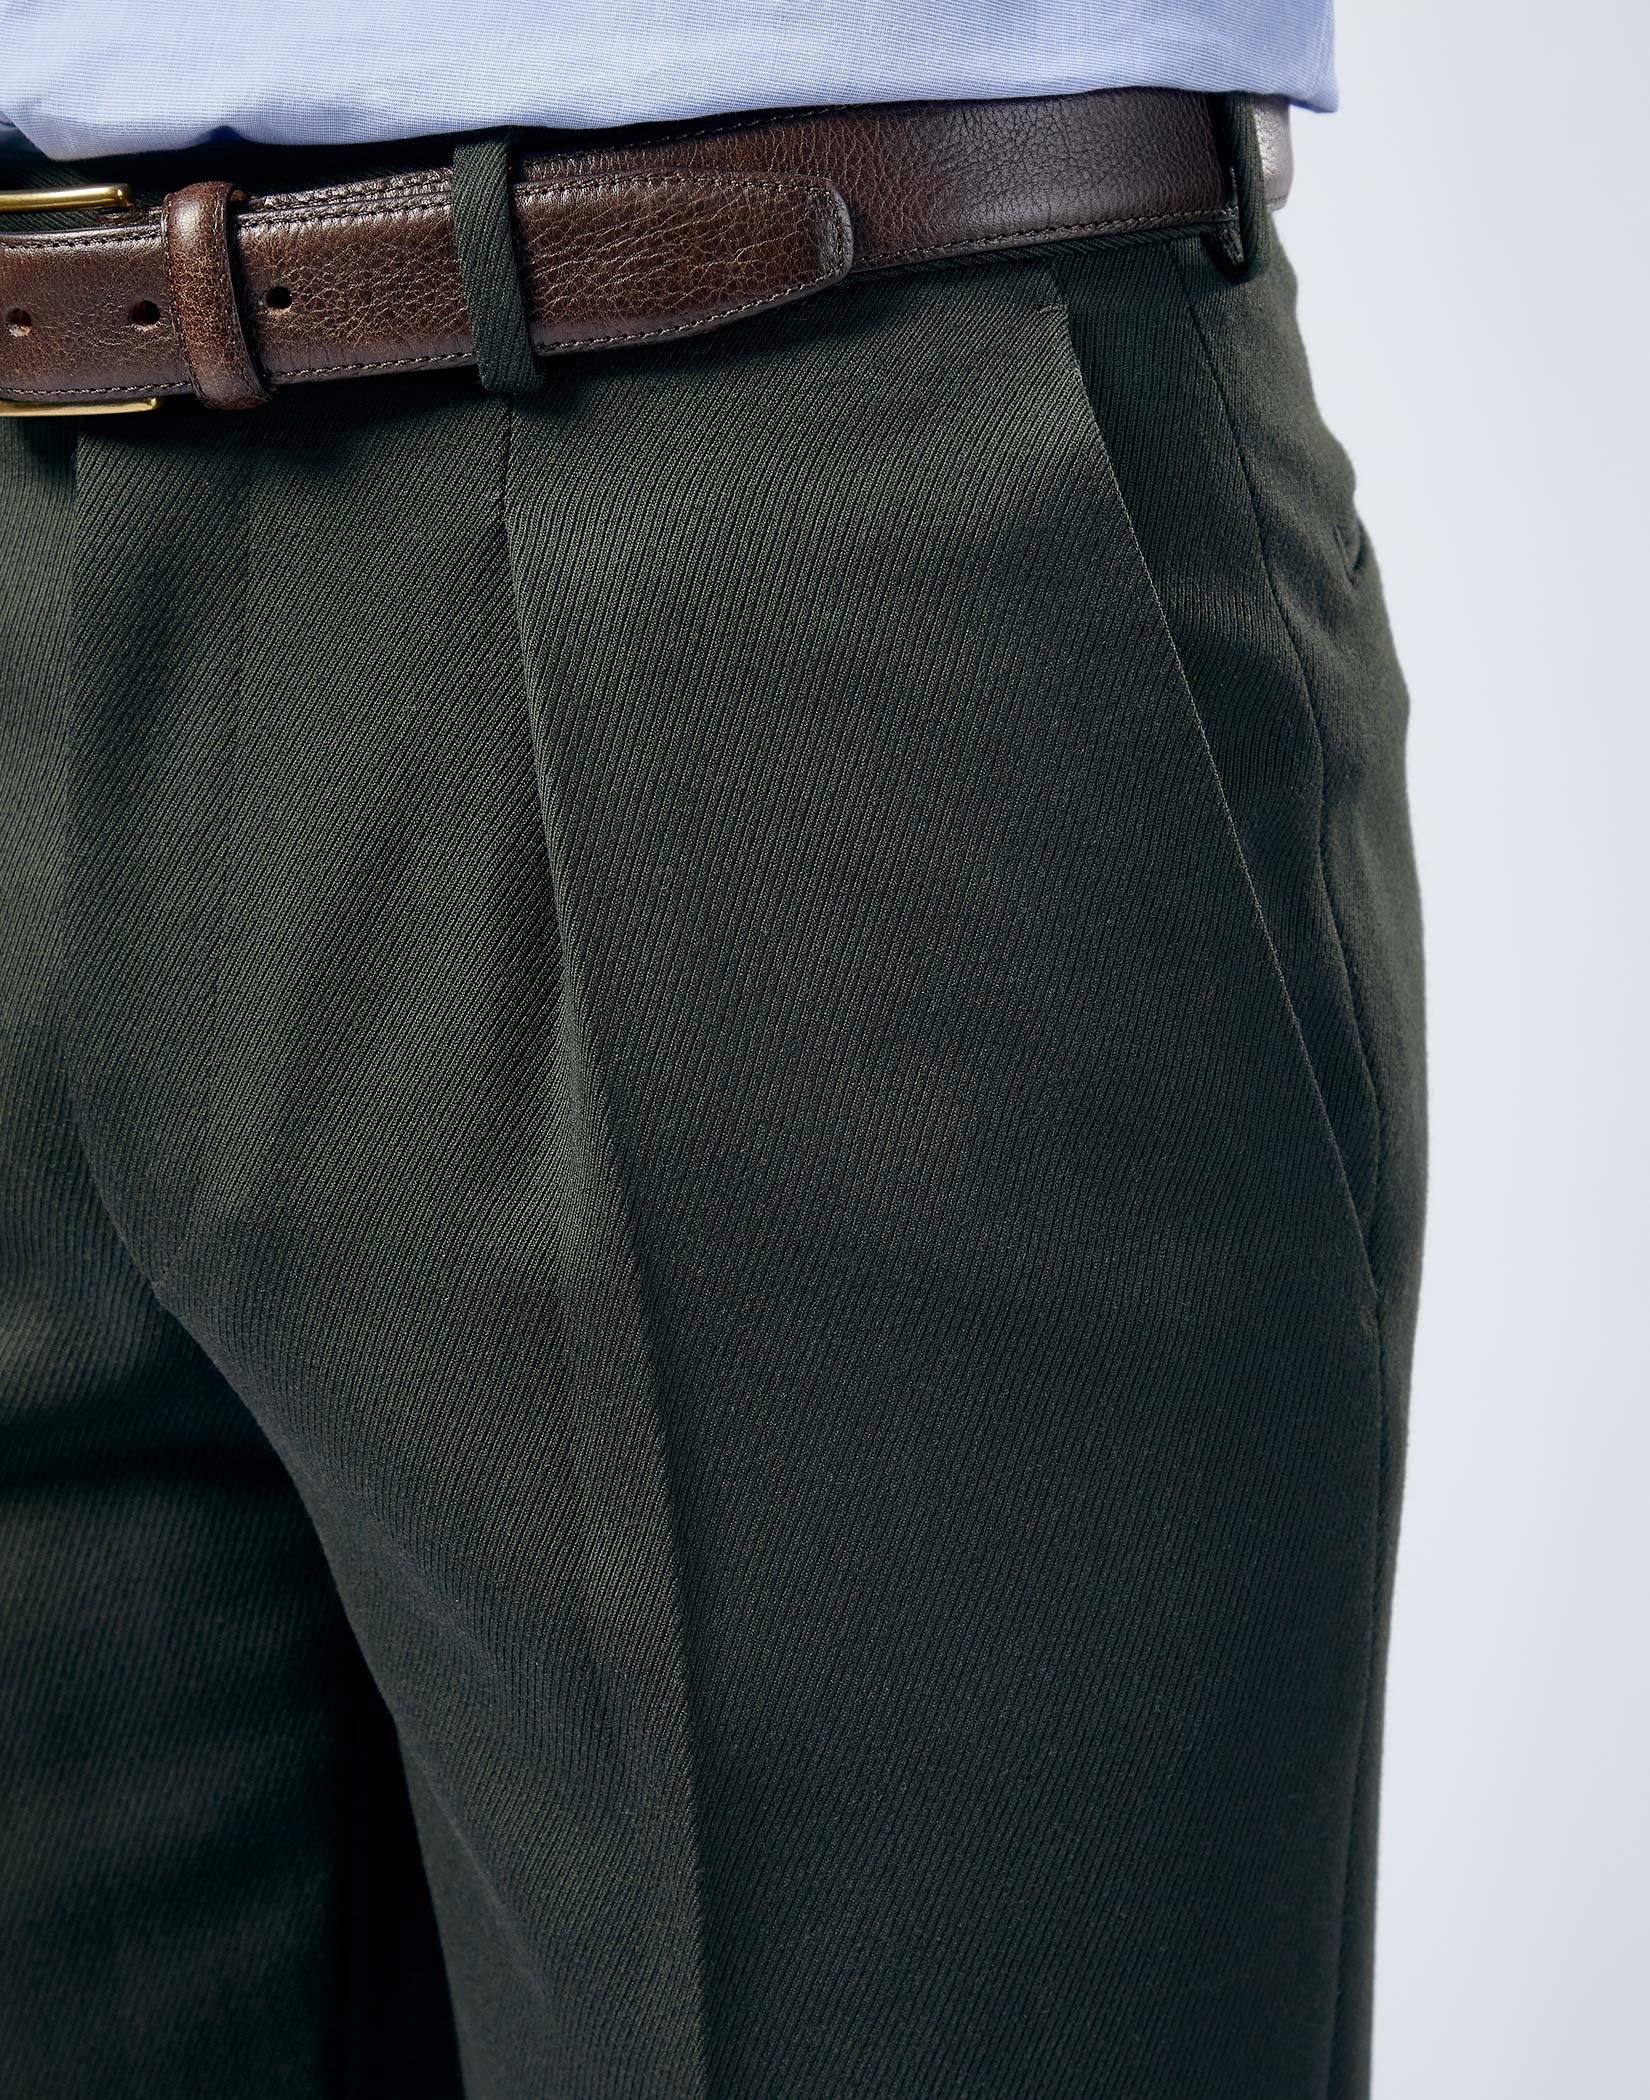 Cavalry Twill Trousers  The Ben Silver Collection